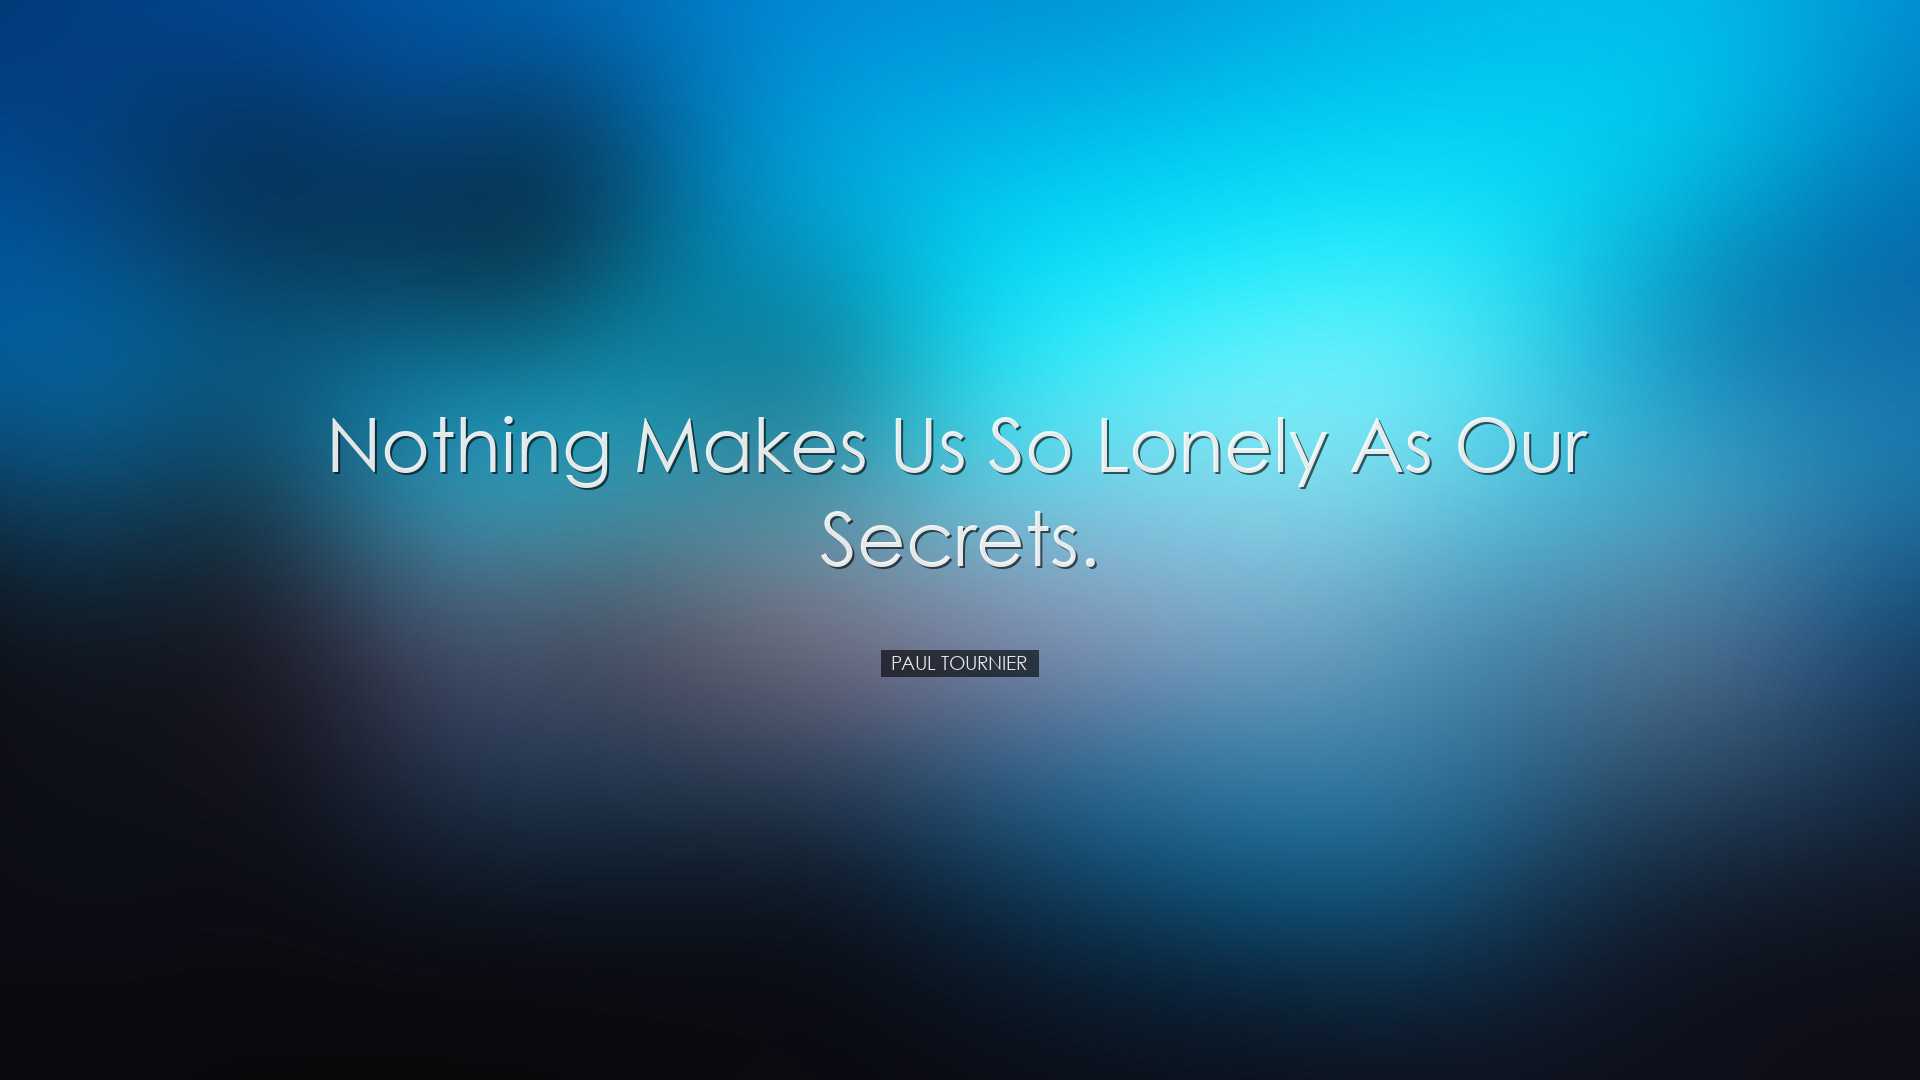 Nothing makes us so lonely as our secrets. - Paul Tournier